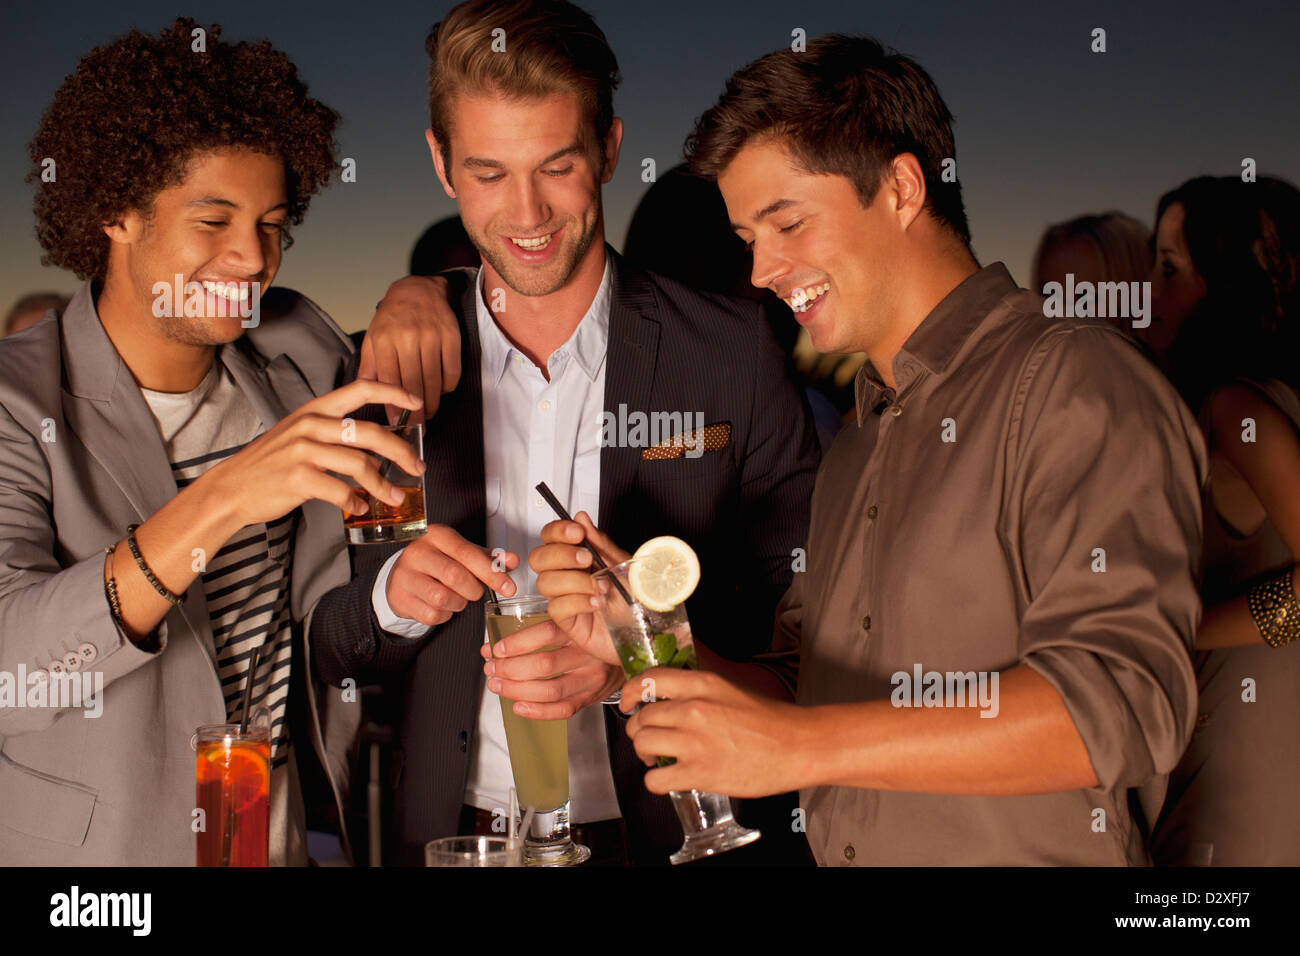 Smiling men toasting cocktails in nightclub Banque D'Images